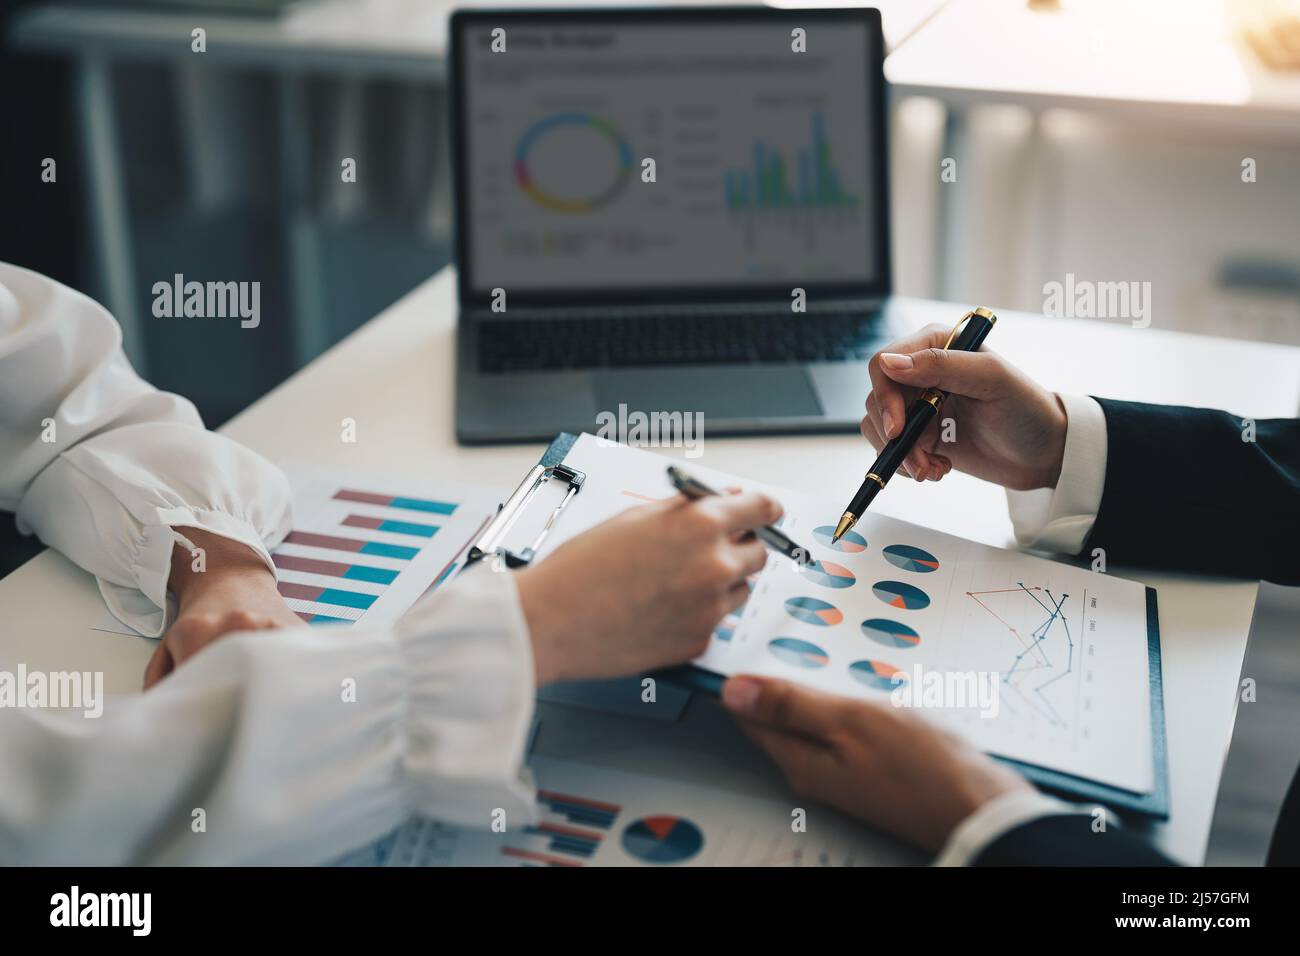 Business adviser analyzing financial figures denoting the progress in the work of the company, business and investment concept. Stock Photo